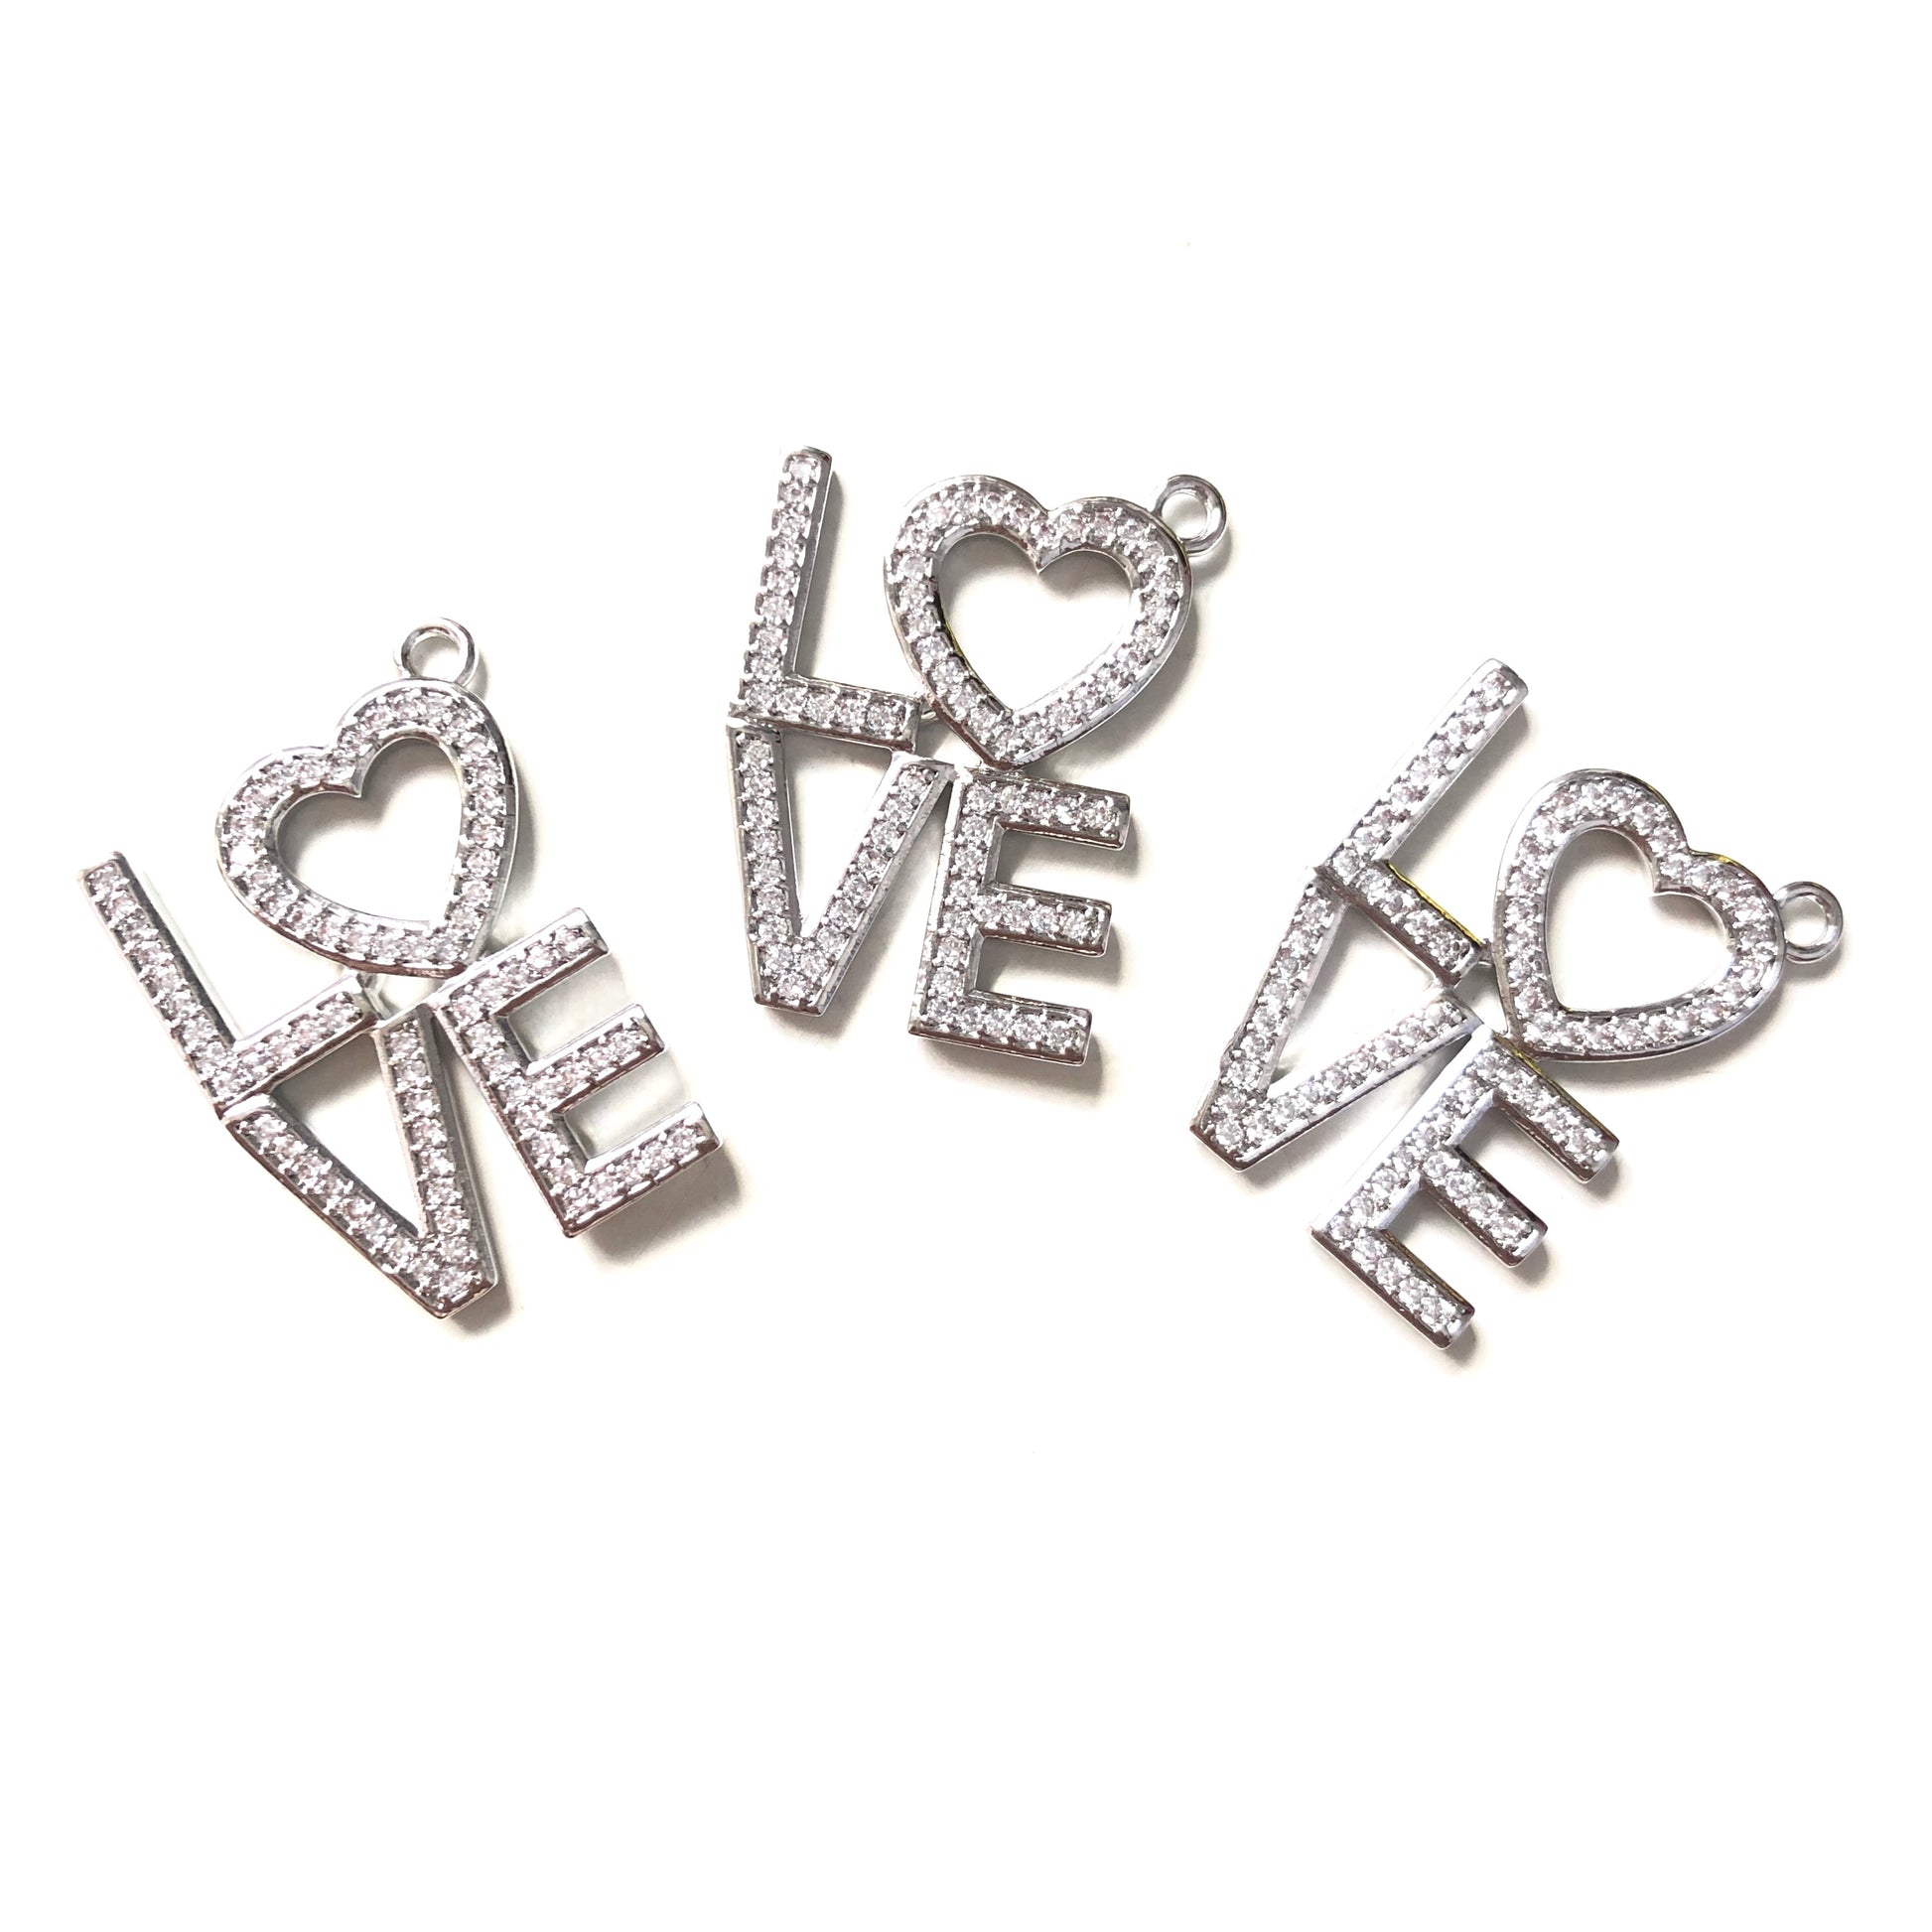 10pcs/lot 25*20mm CZ Paved LOVE Charms Silver CZ Paved Charms Love Letters Words & Quotes Charms Beads Beyond